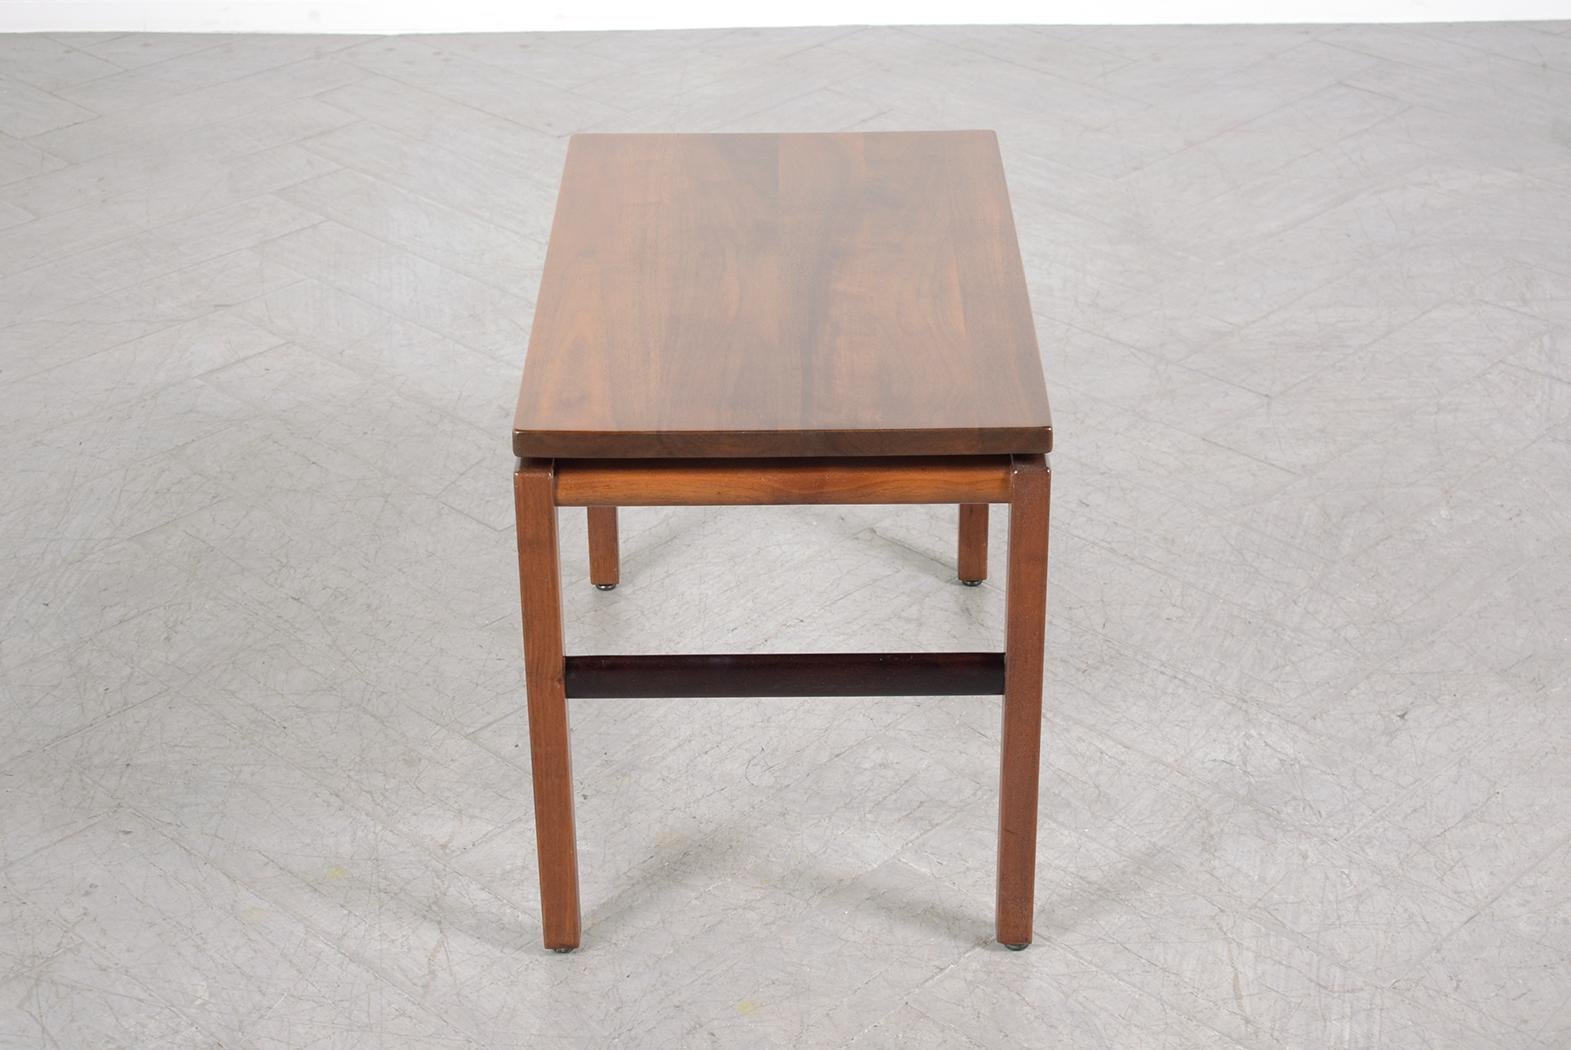 Carved 1960s Mid-Century Modern Walnut Side Table: Restored with Ebonized Accents For Sale